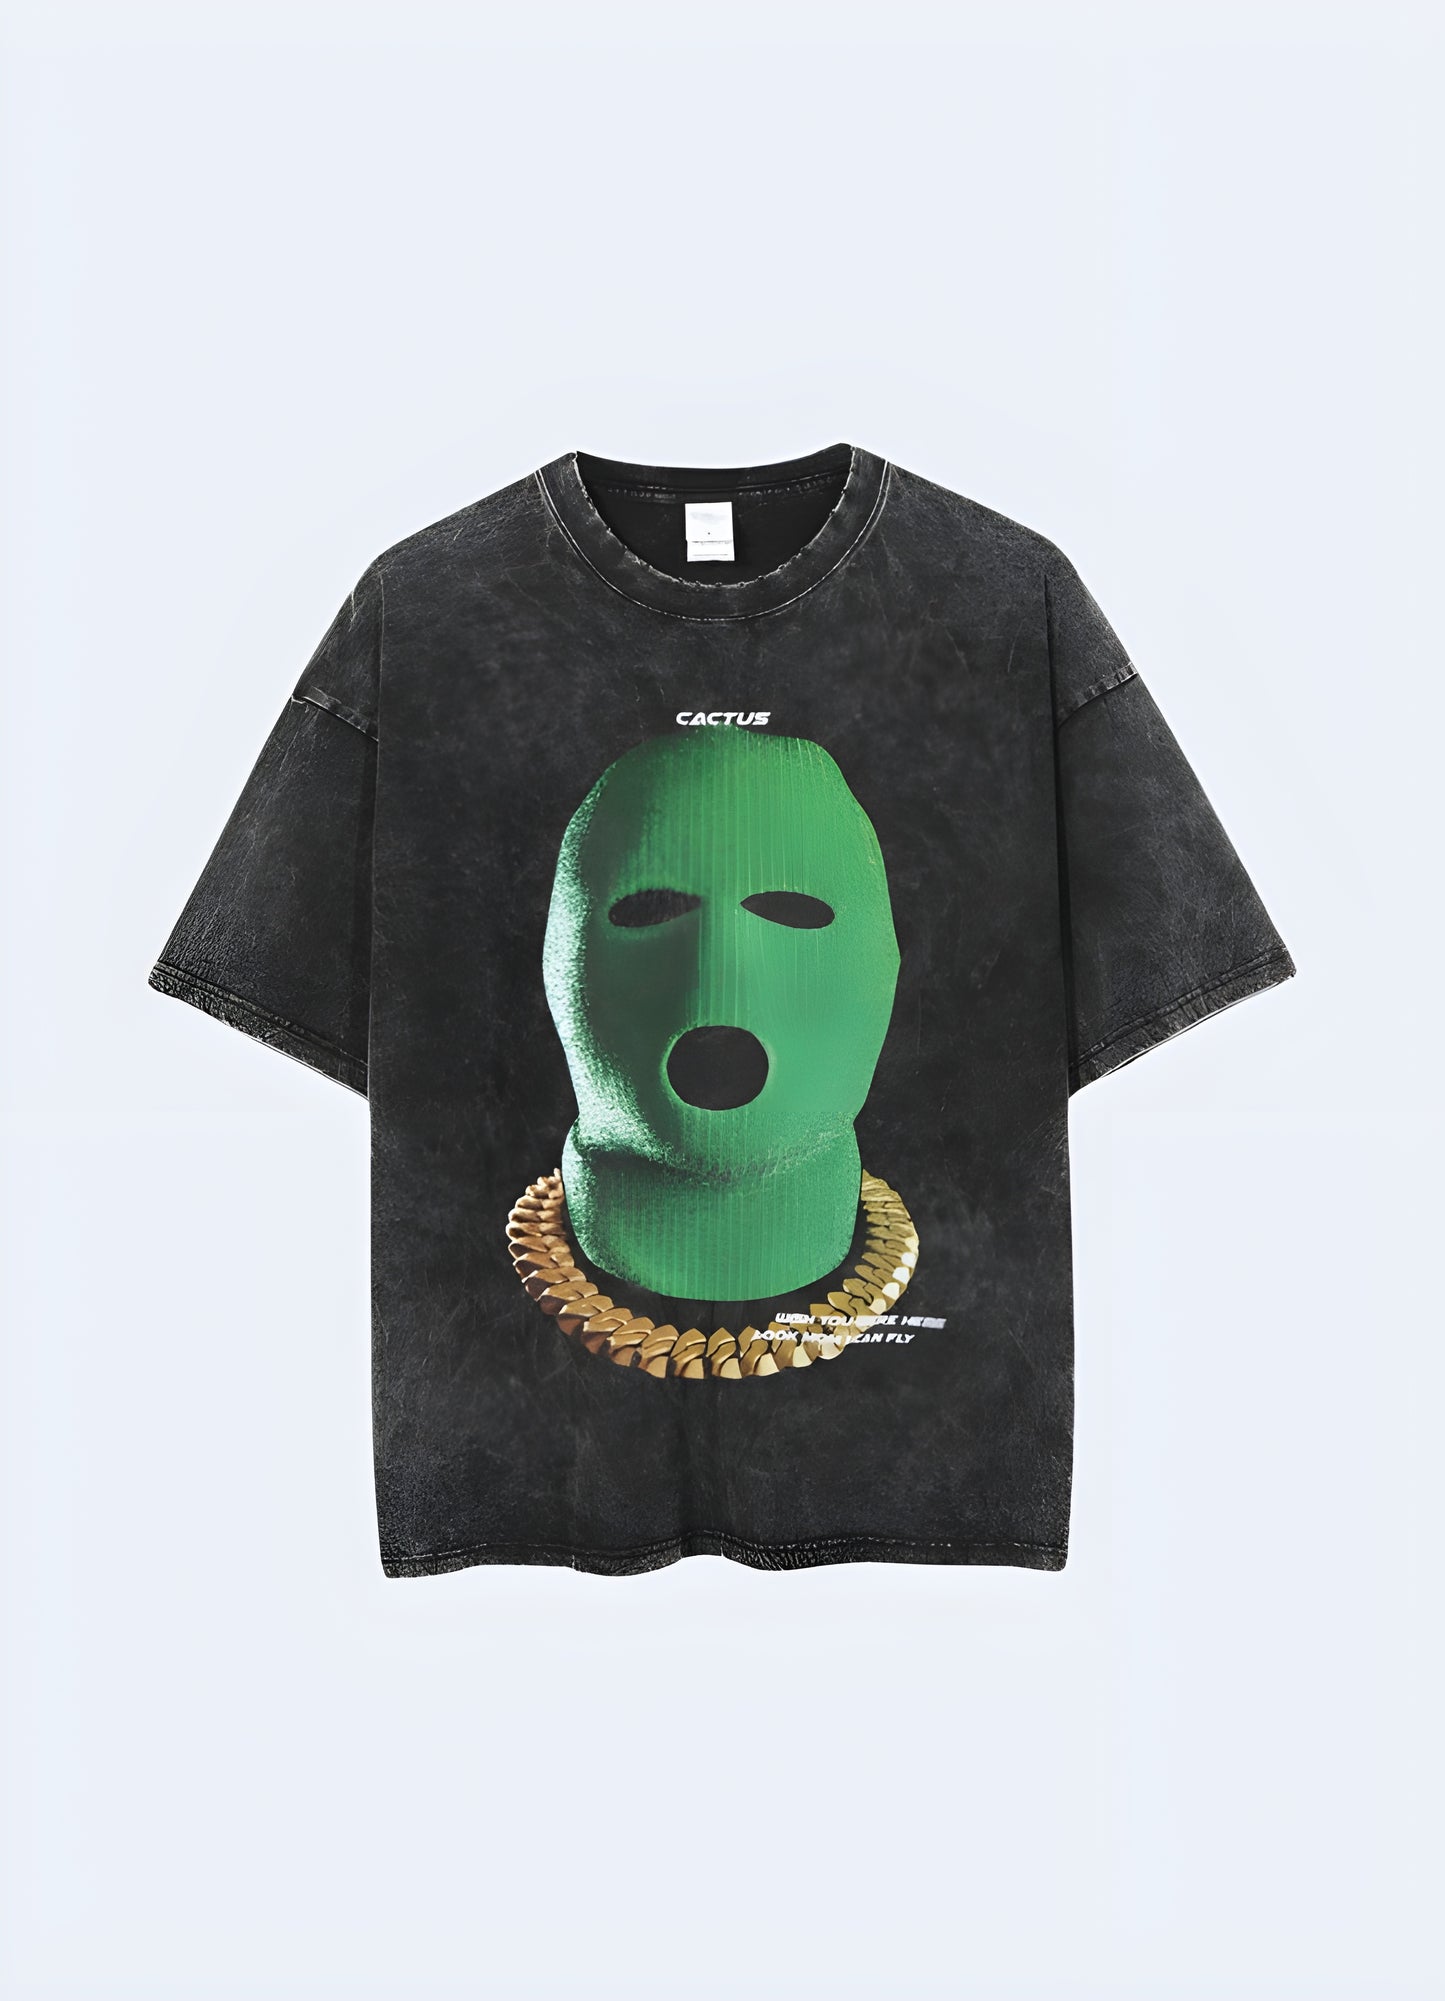 This gangster t-shirt embodies the vibrancy of the street culture.